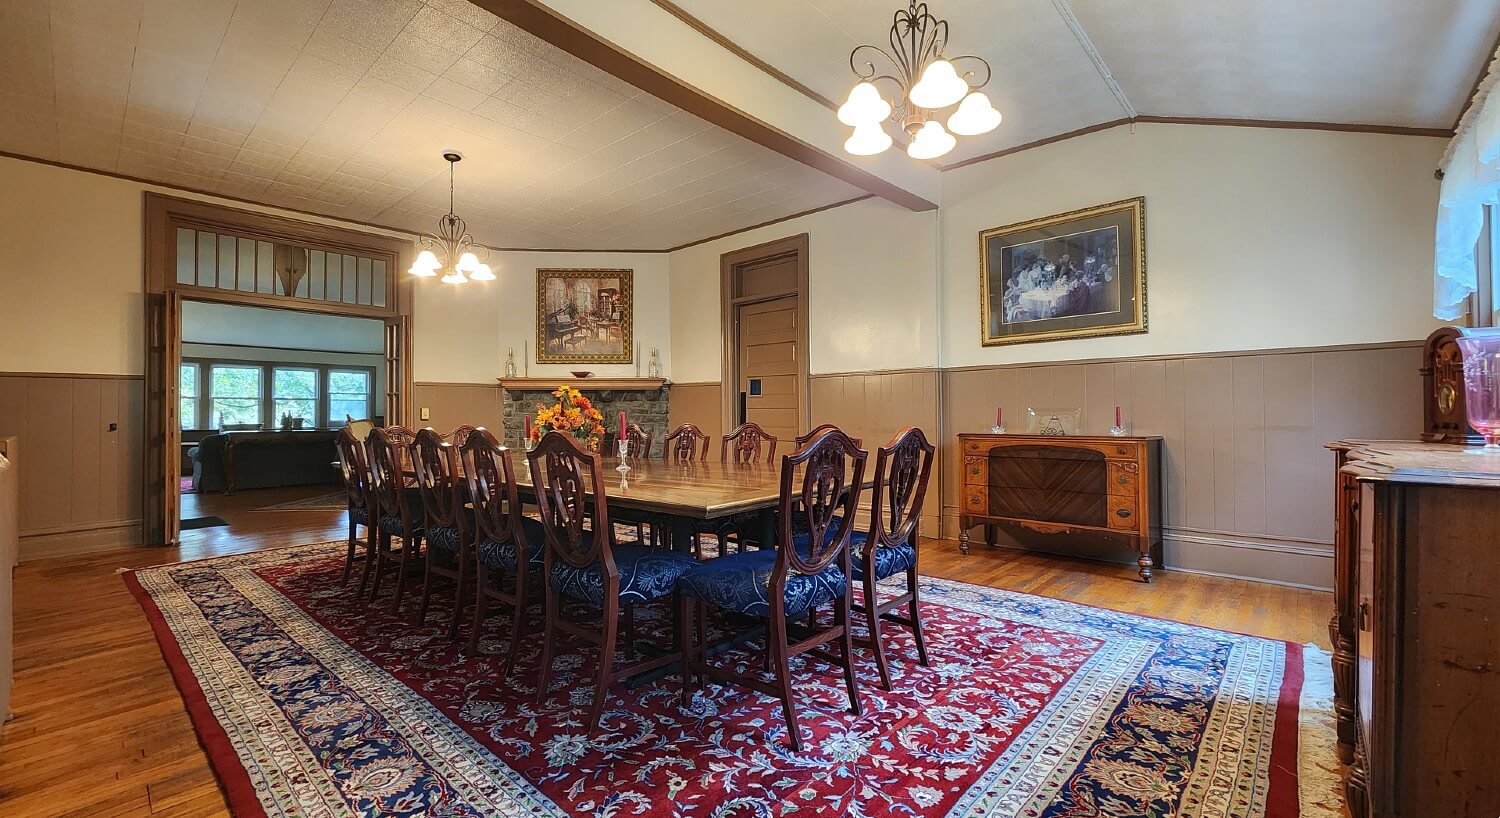 Large dining room with table for twelve, oriental rug, buffet tables, fireplace and doorway into separate living room